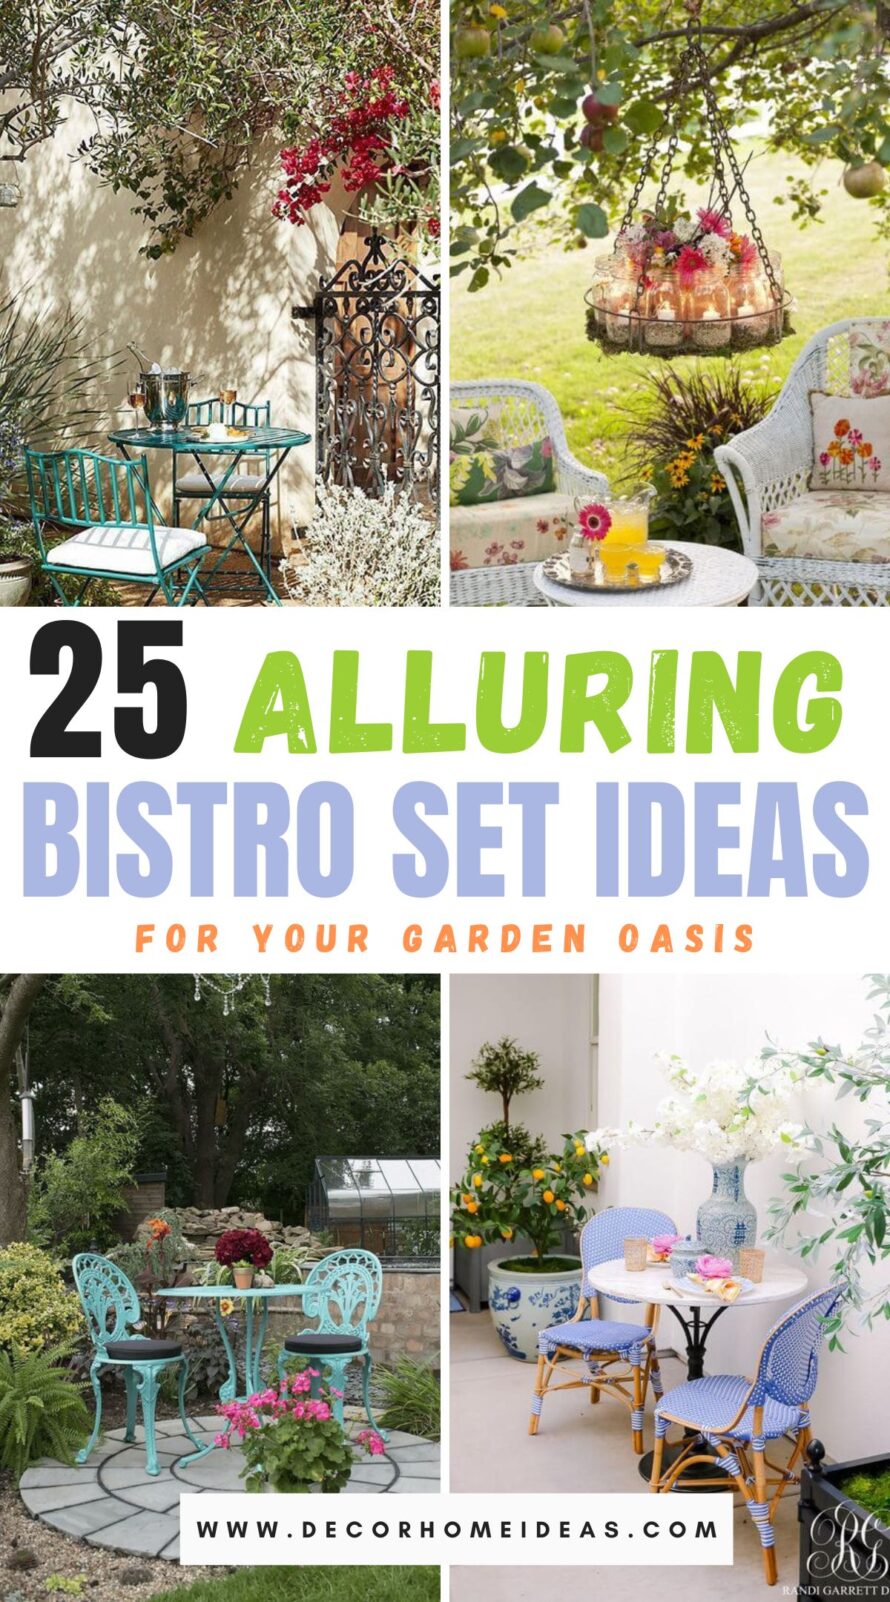 Transform your garden into a relaxing haven with these 25 alluring bistro set garden landscaping ideas. Create the perfect outdoor escape with these inspiring designs.